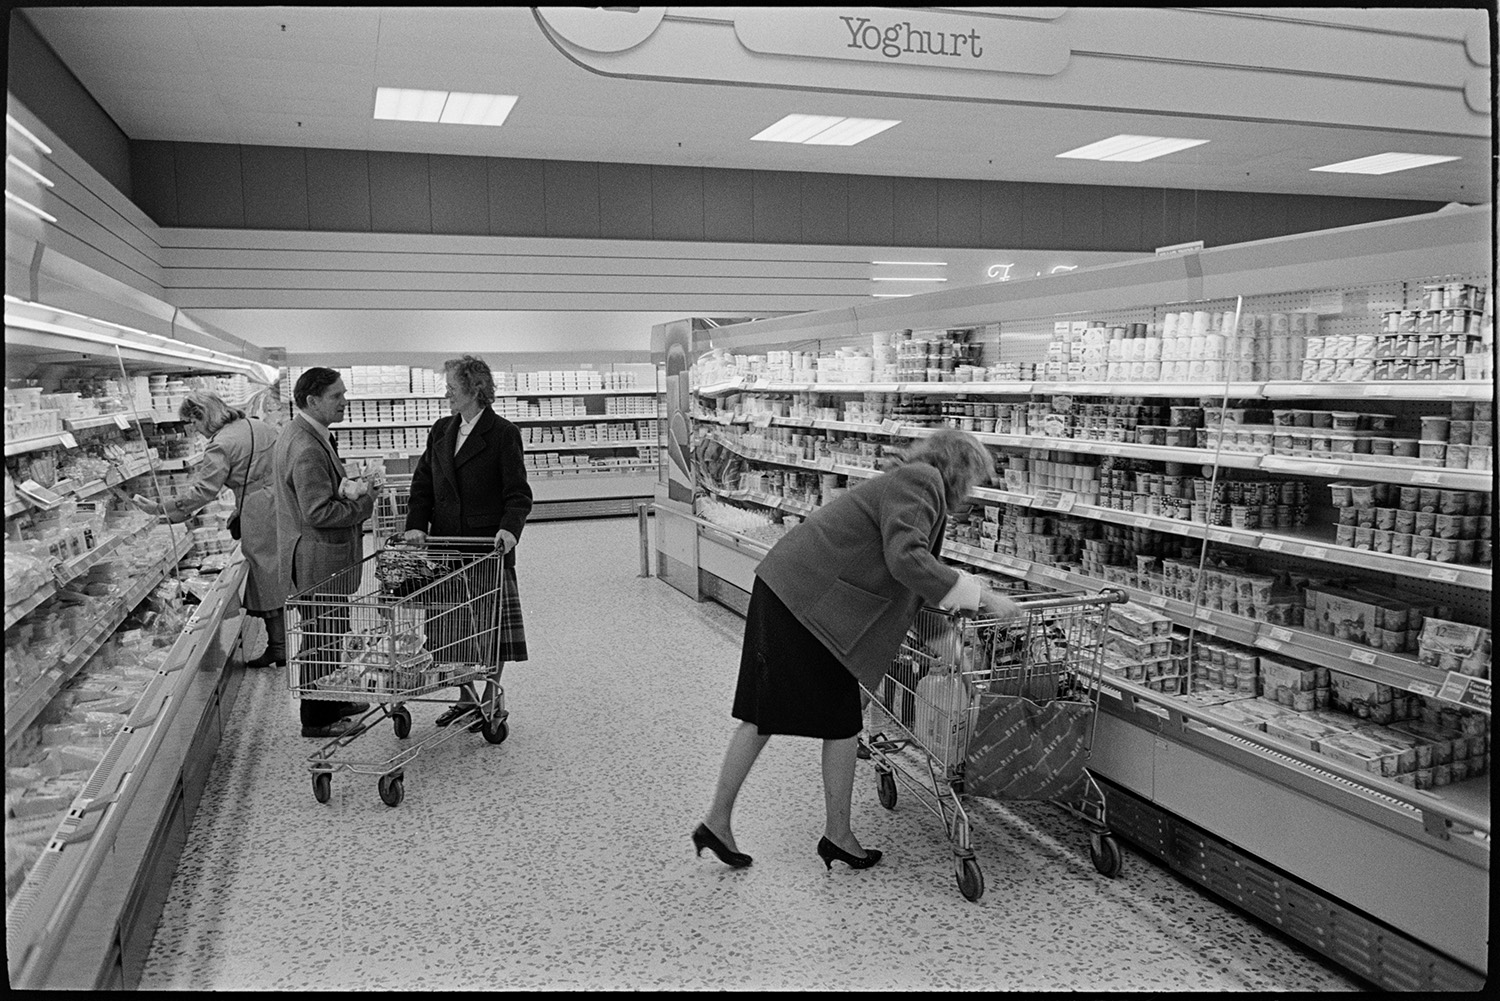 Interior of supermarket with people shopping, delivery lorry being unloaded. 
[People shopping in the Tesco supermarket in Barnstaple. Two women are selecting goods in the chilled aisle and a man and woman are talking by a trolley.]